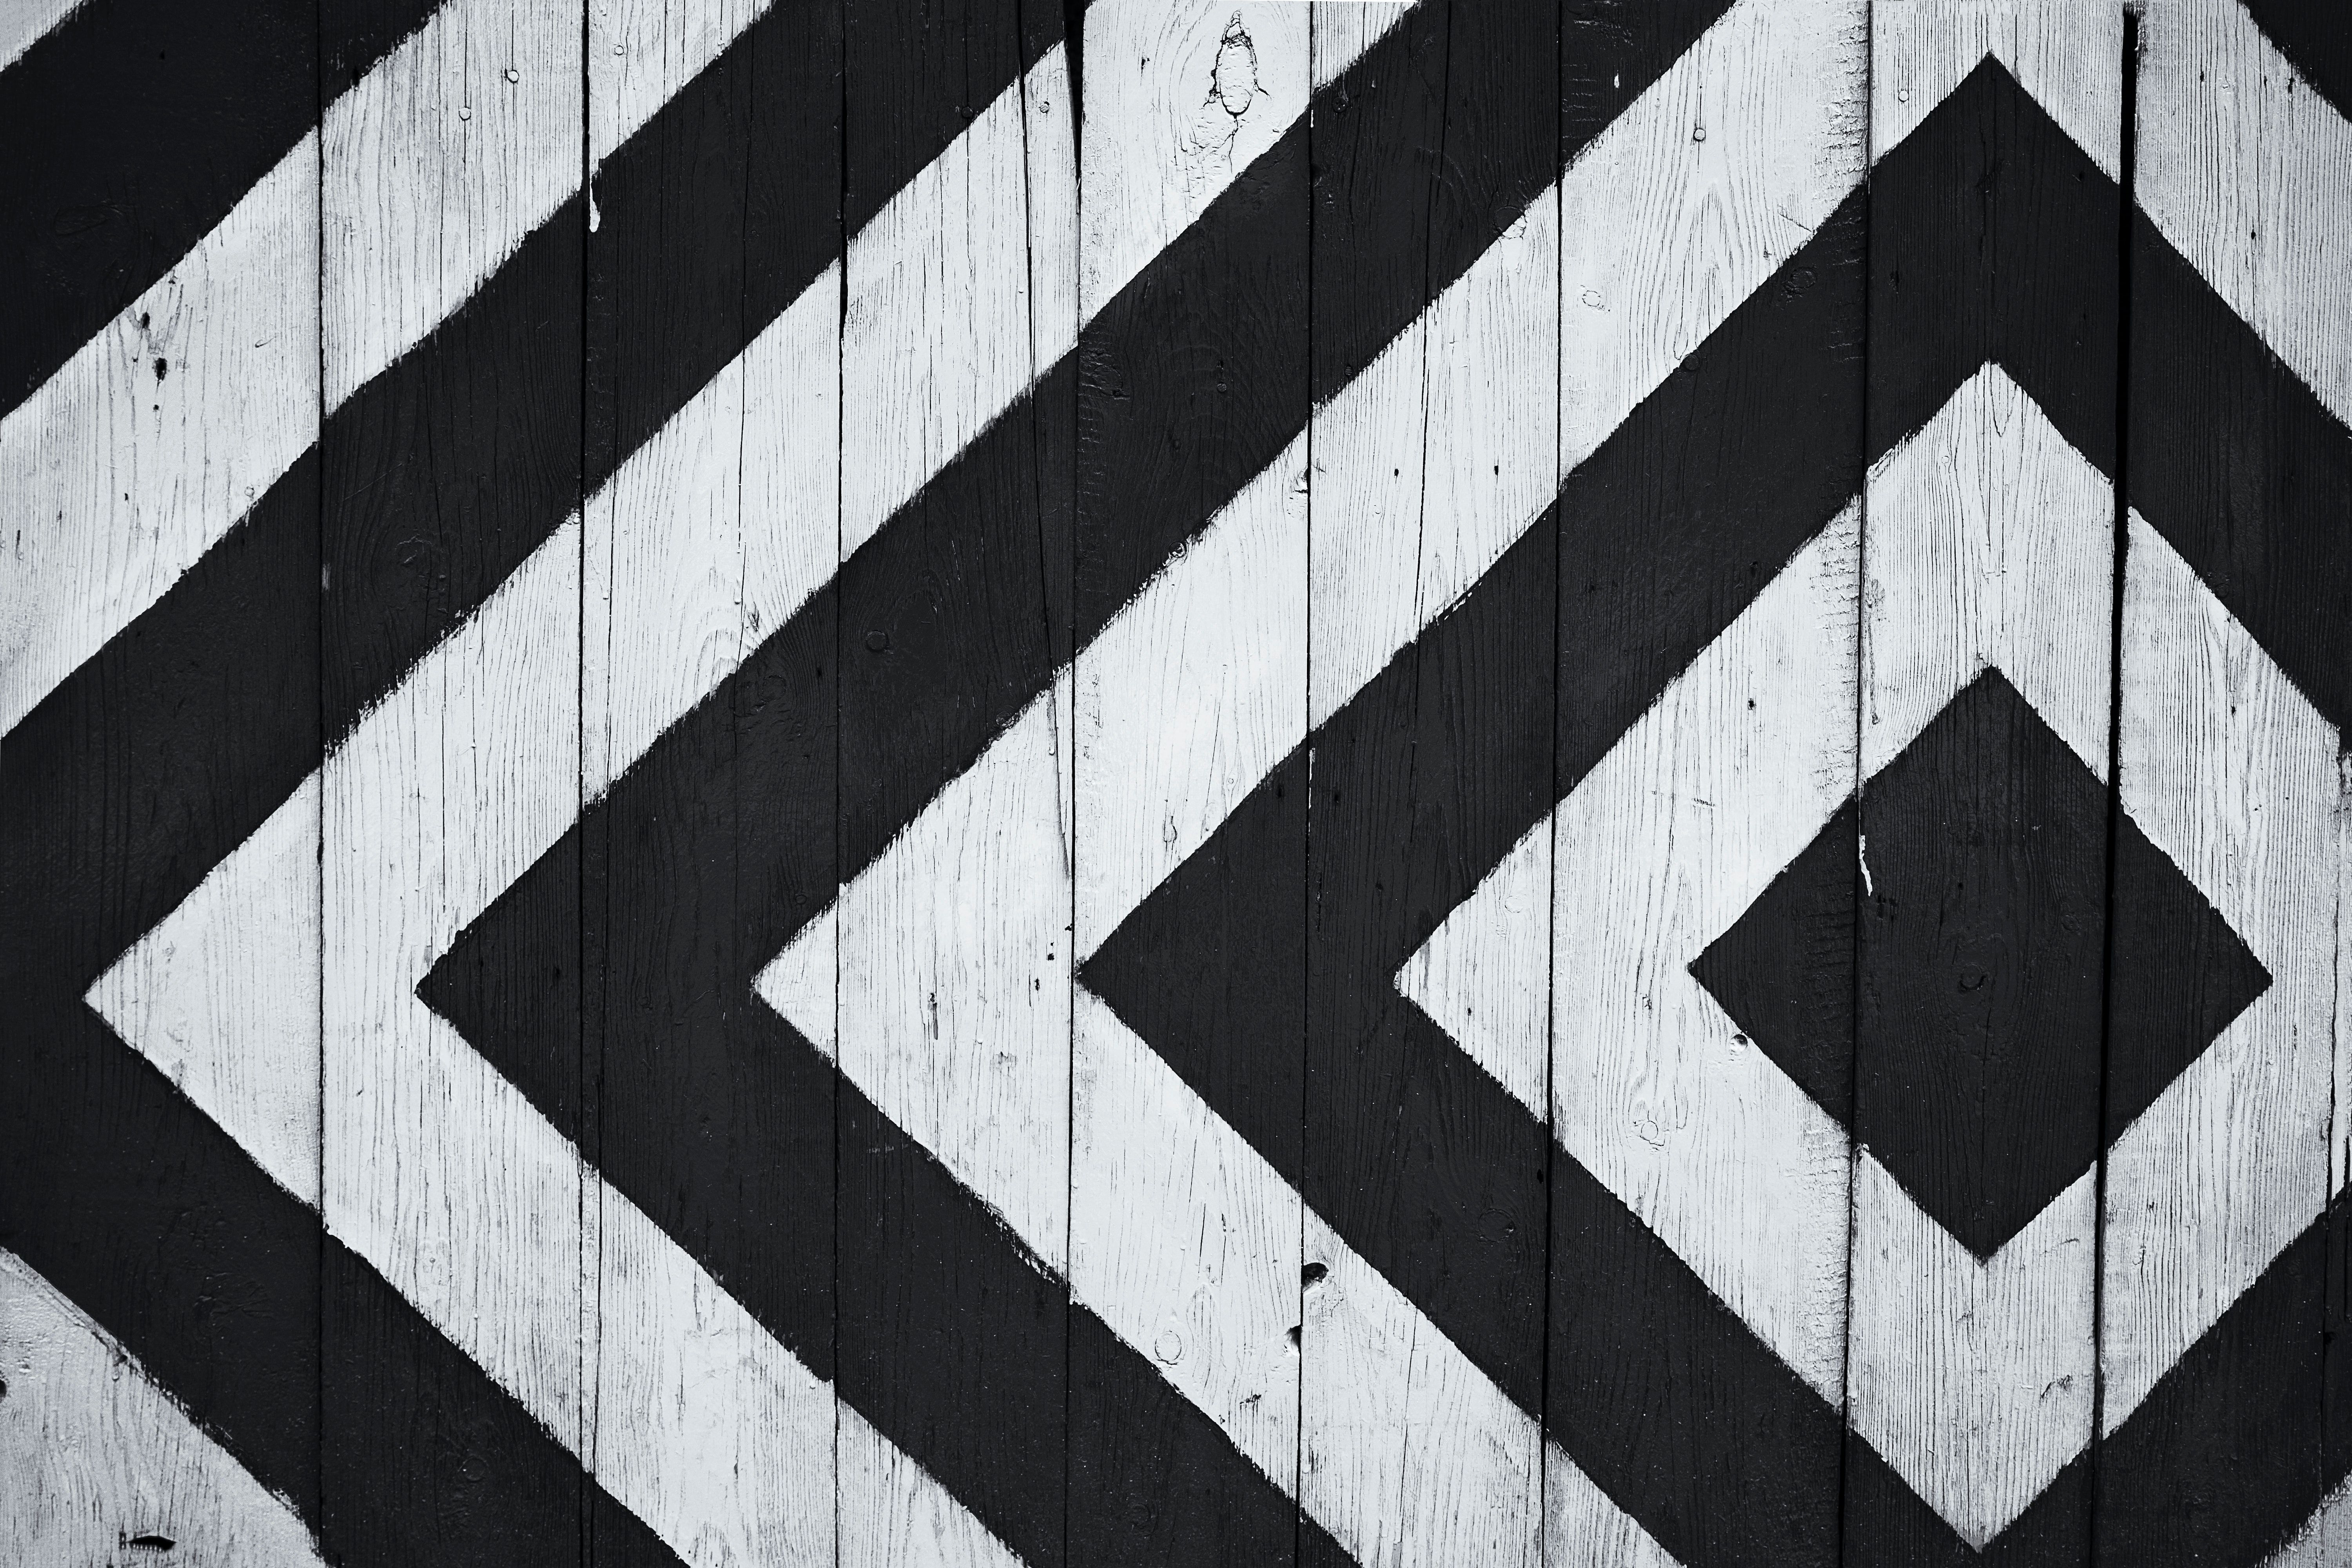 A black and white graphic pattern on a wooden wall - Black and white